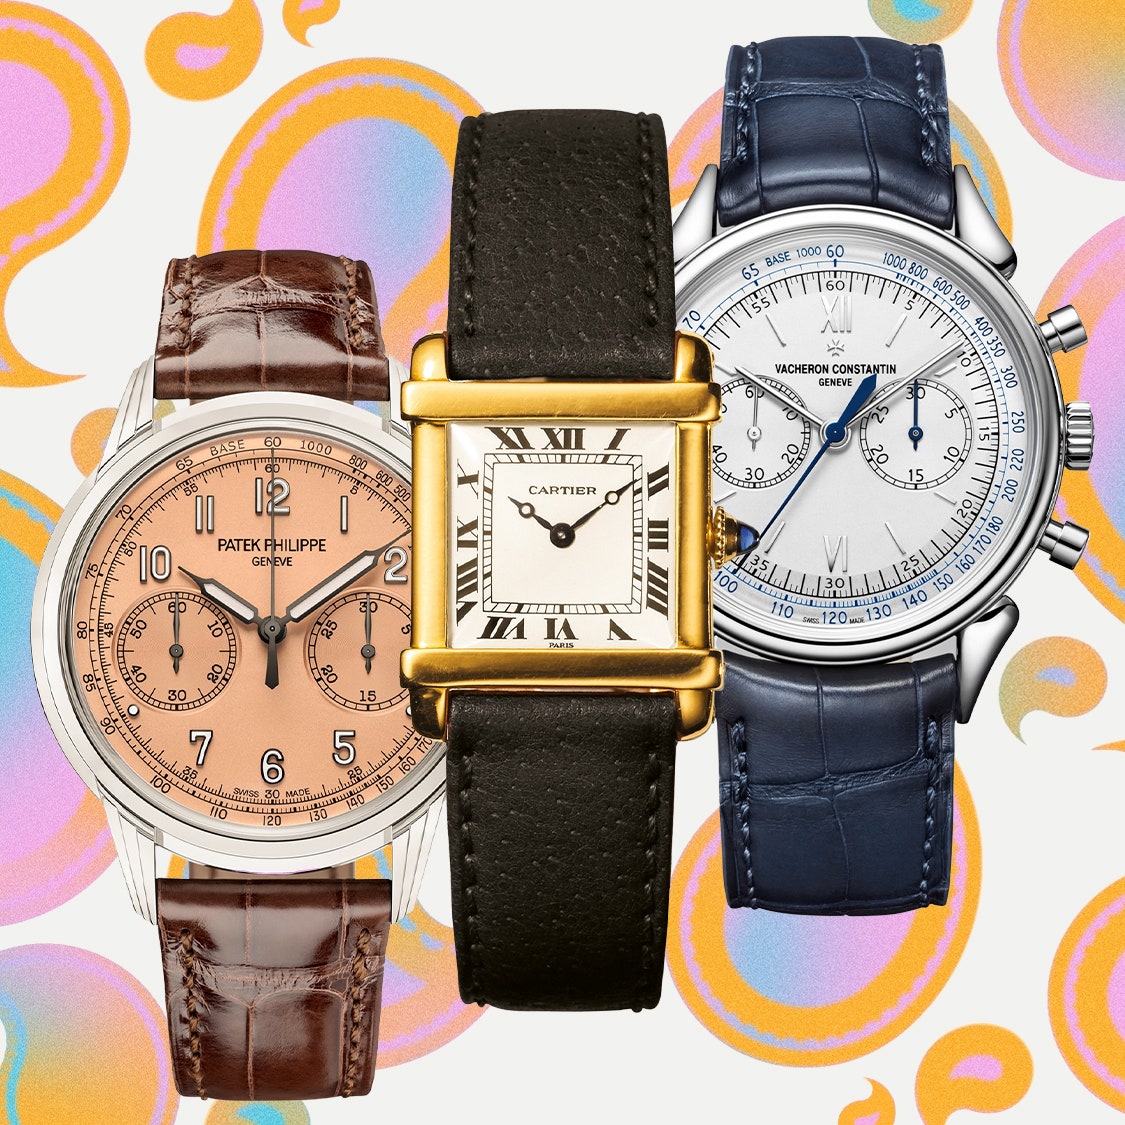 Why the coolest new watches look like vintage grails